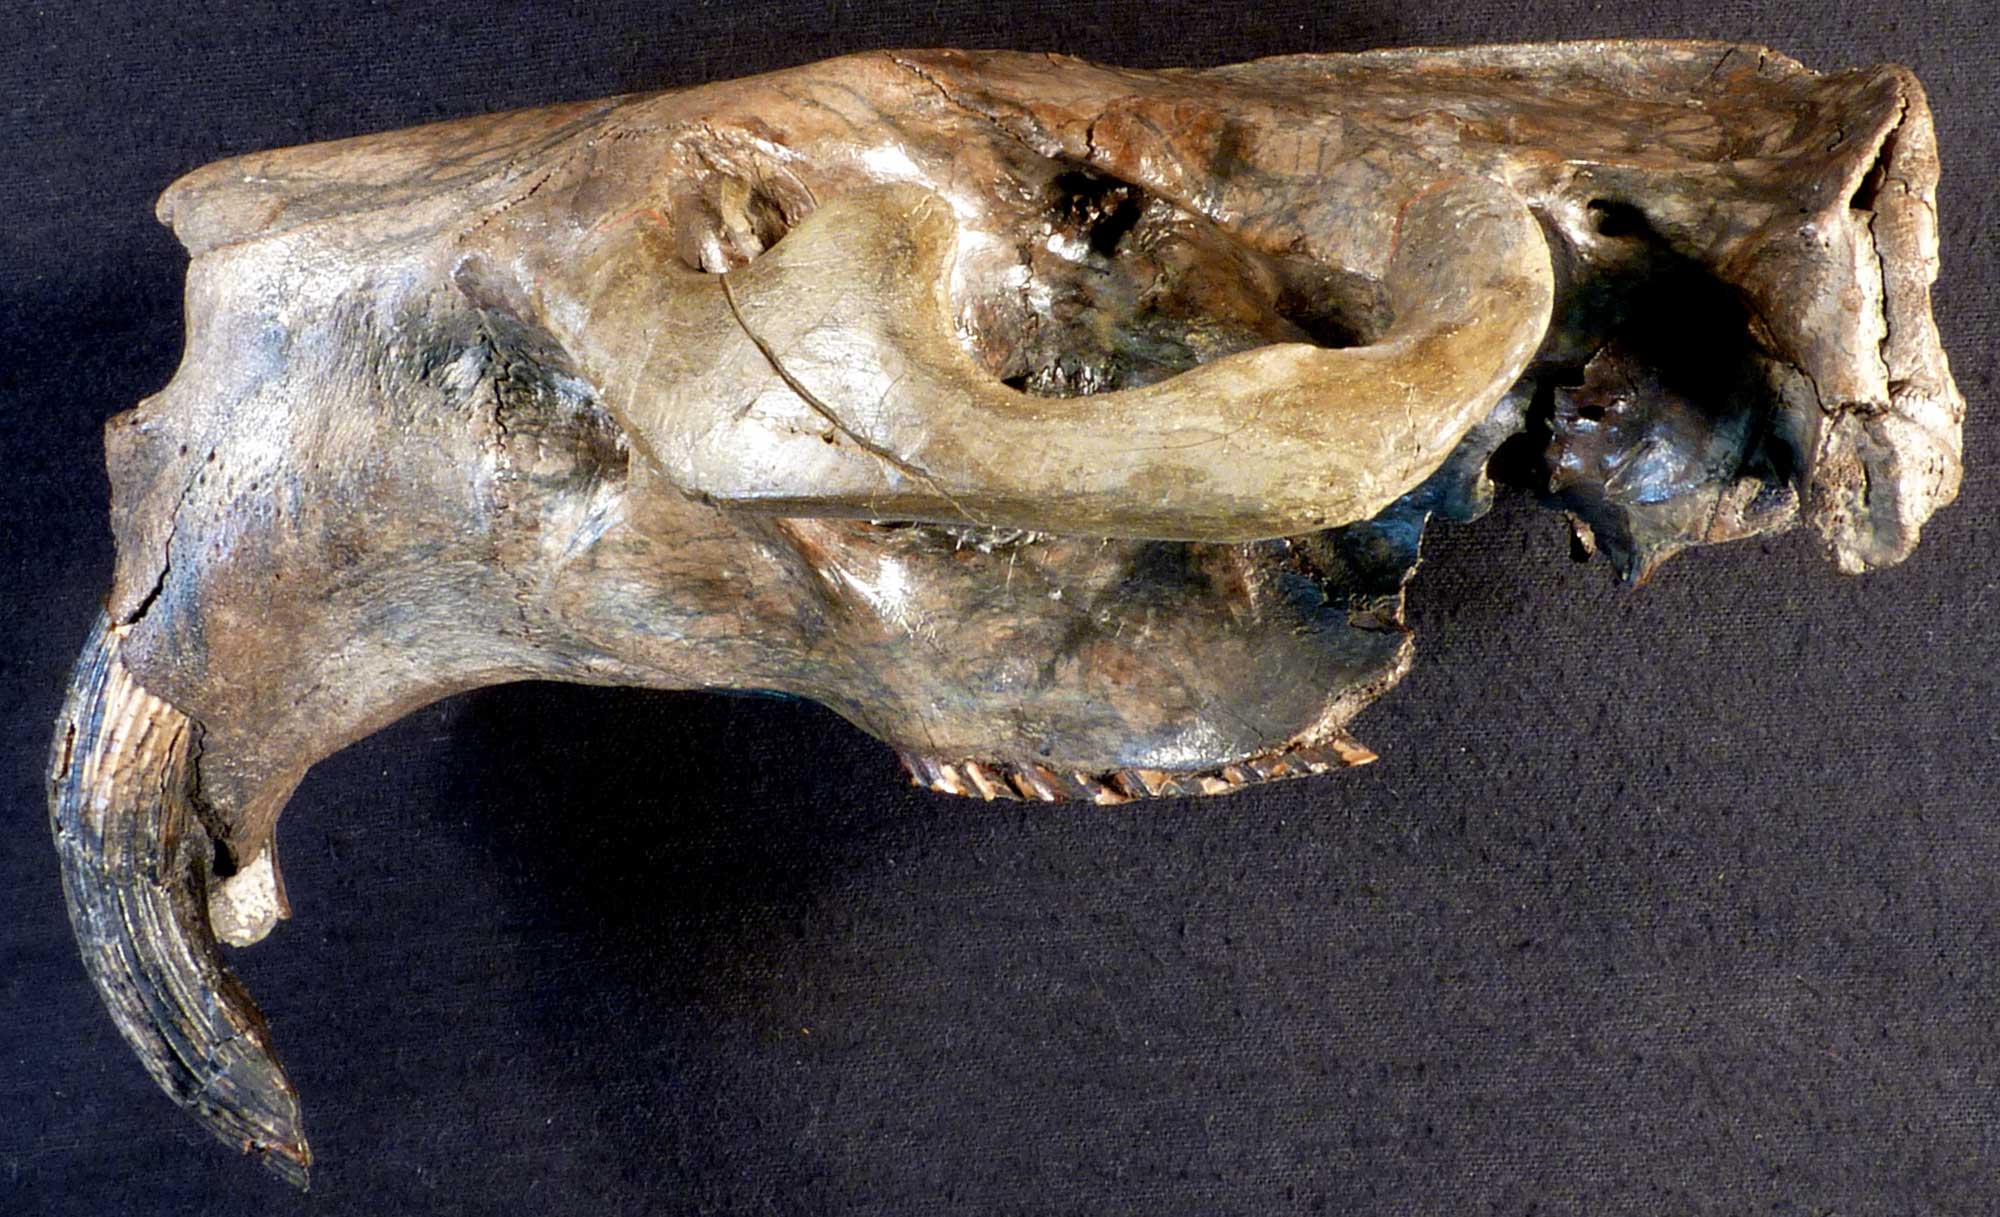 Photograph of the skull of a beaver from the Pleistocene of Indiana. The photo shows the upper part of a beaver skull with its nose pointed to the left. The skull preserved the characteristic large front teeth of the animal.